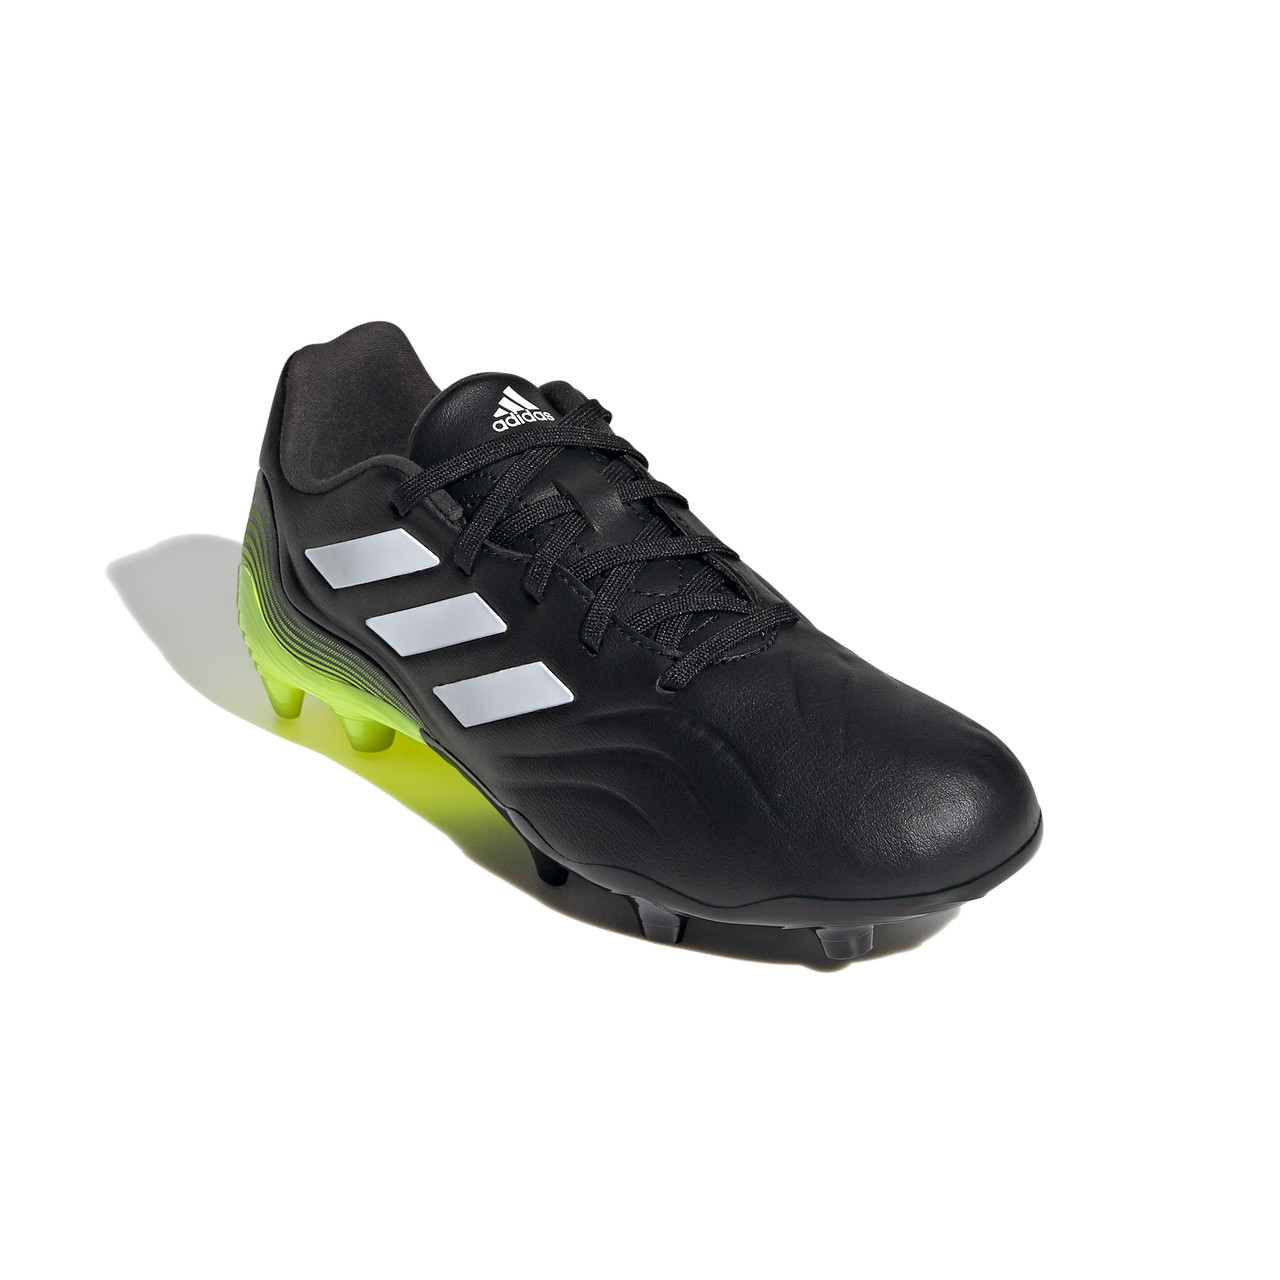 adidas Copa Sense.3 Ground Cleats Youth Version Black/White - Chicago Soccer